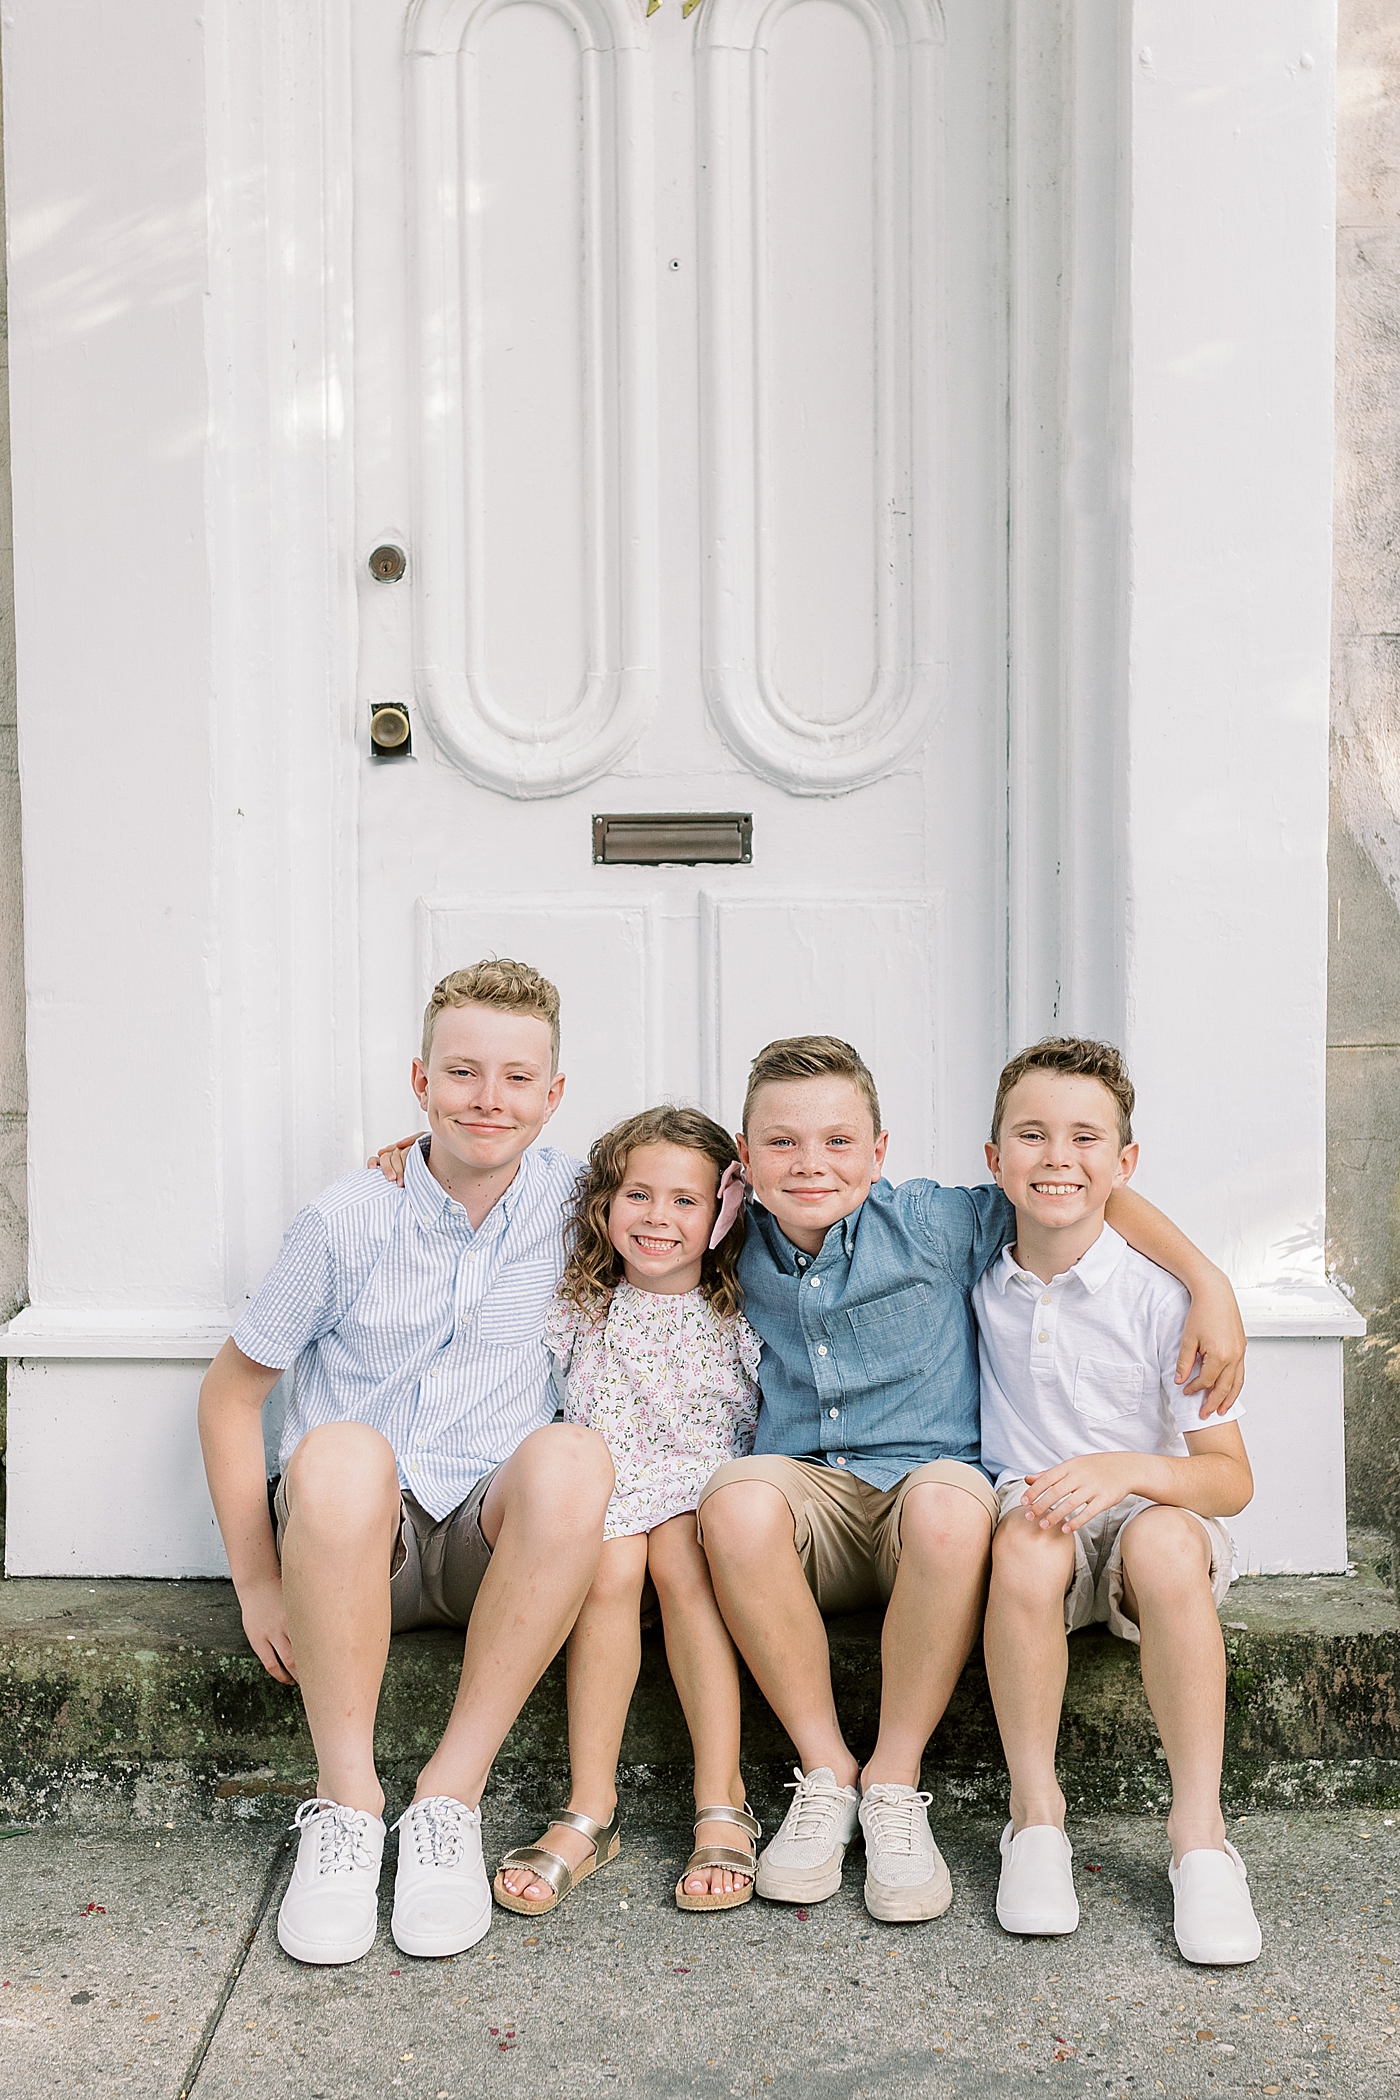 Siblings smiling sitting together on a stoop | Photo by Caitlyn Motycka Photography